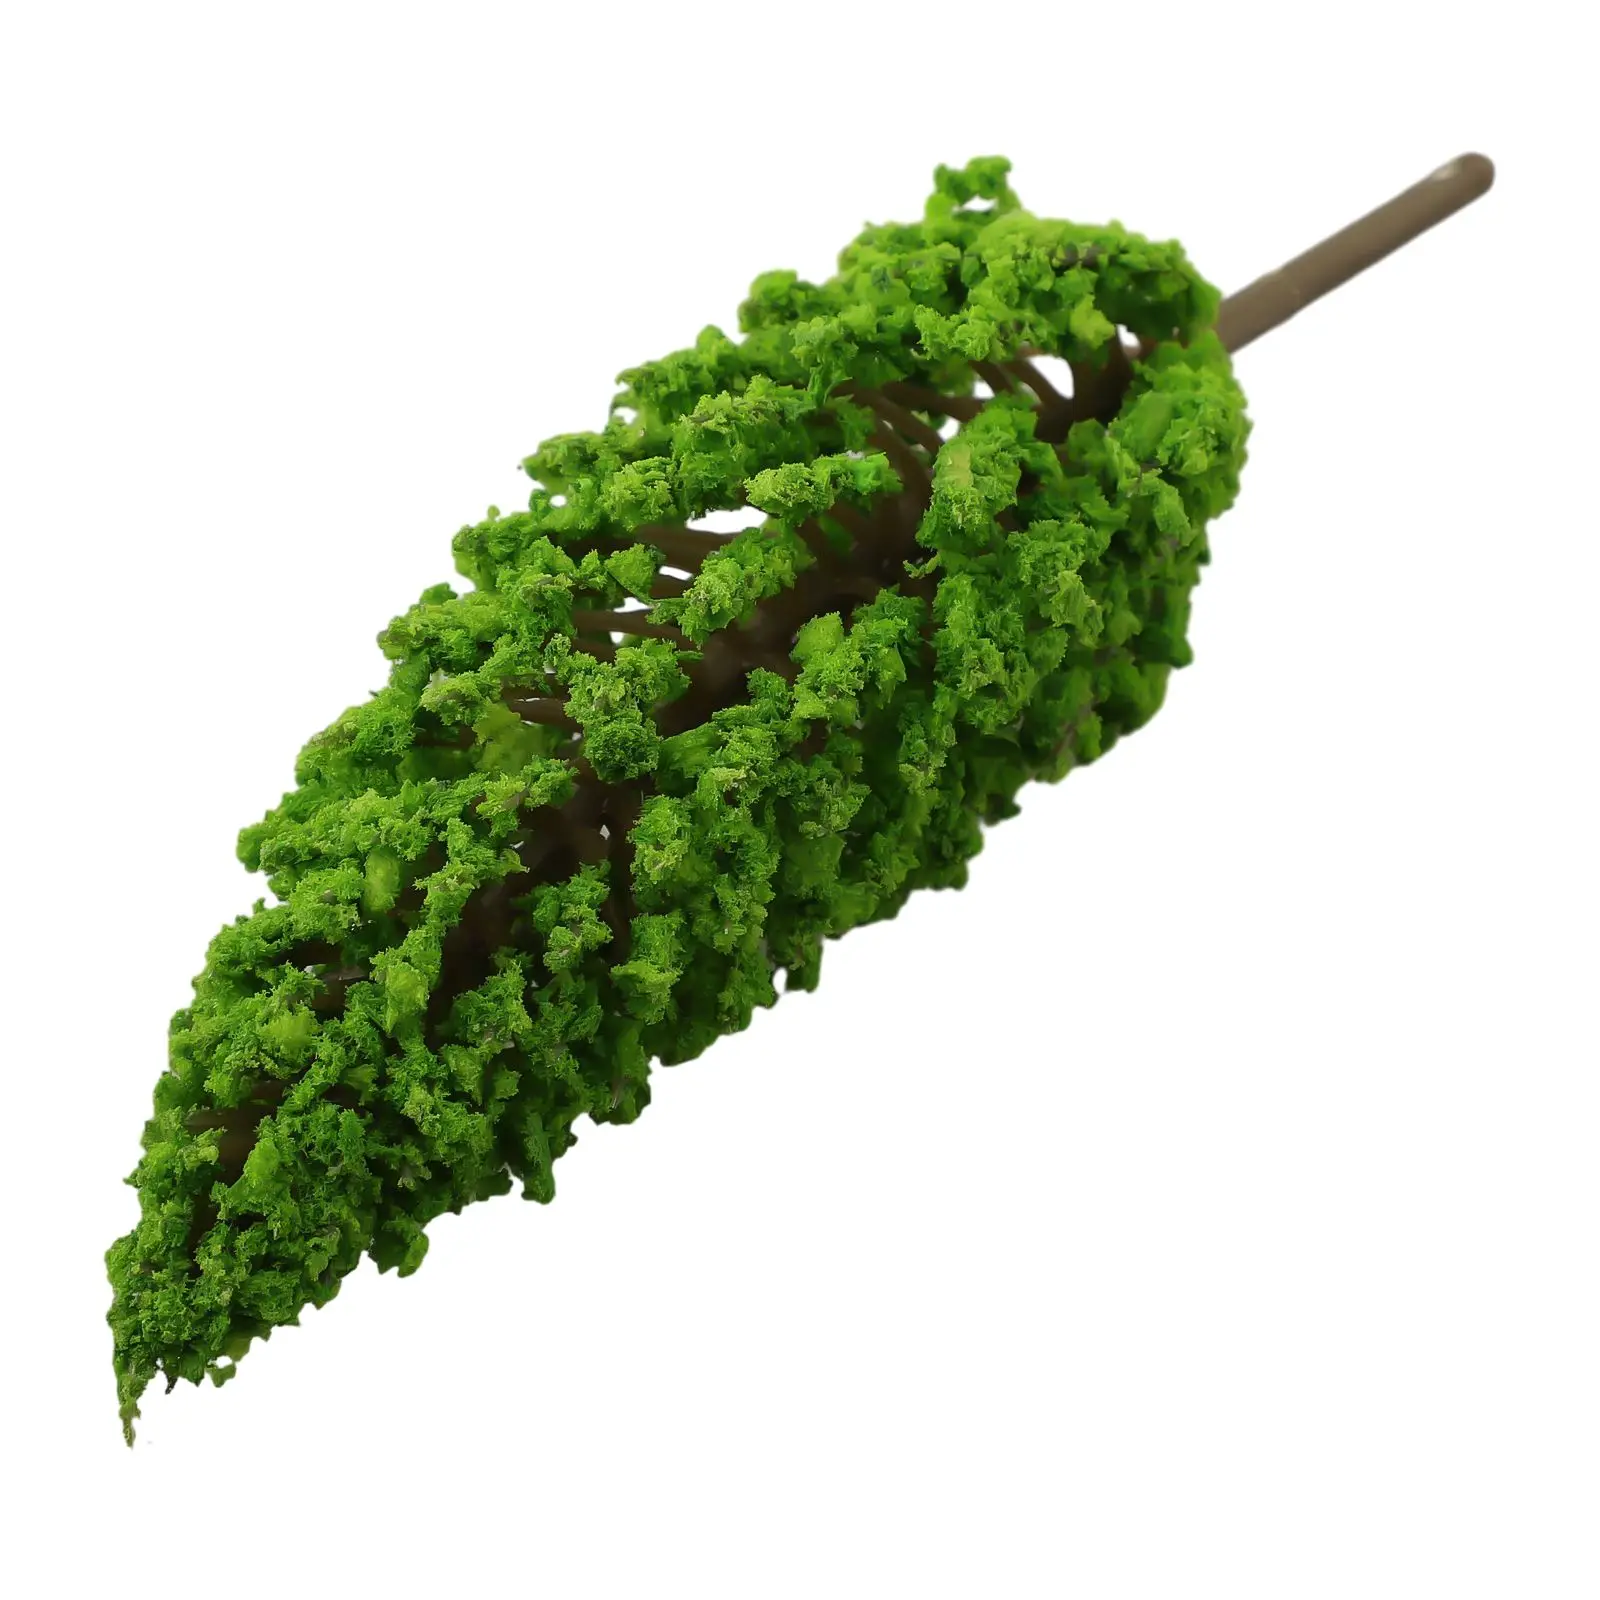 Enhance Your Miniature World with Green Pine Model Trees, Suitable for Train Railroad Models, Wargaming, and Bonsai Decoration